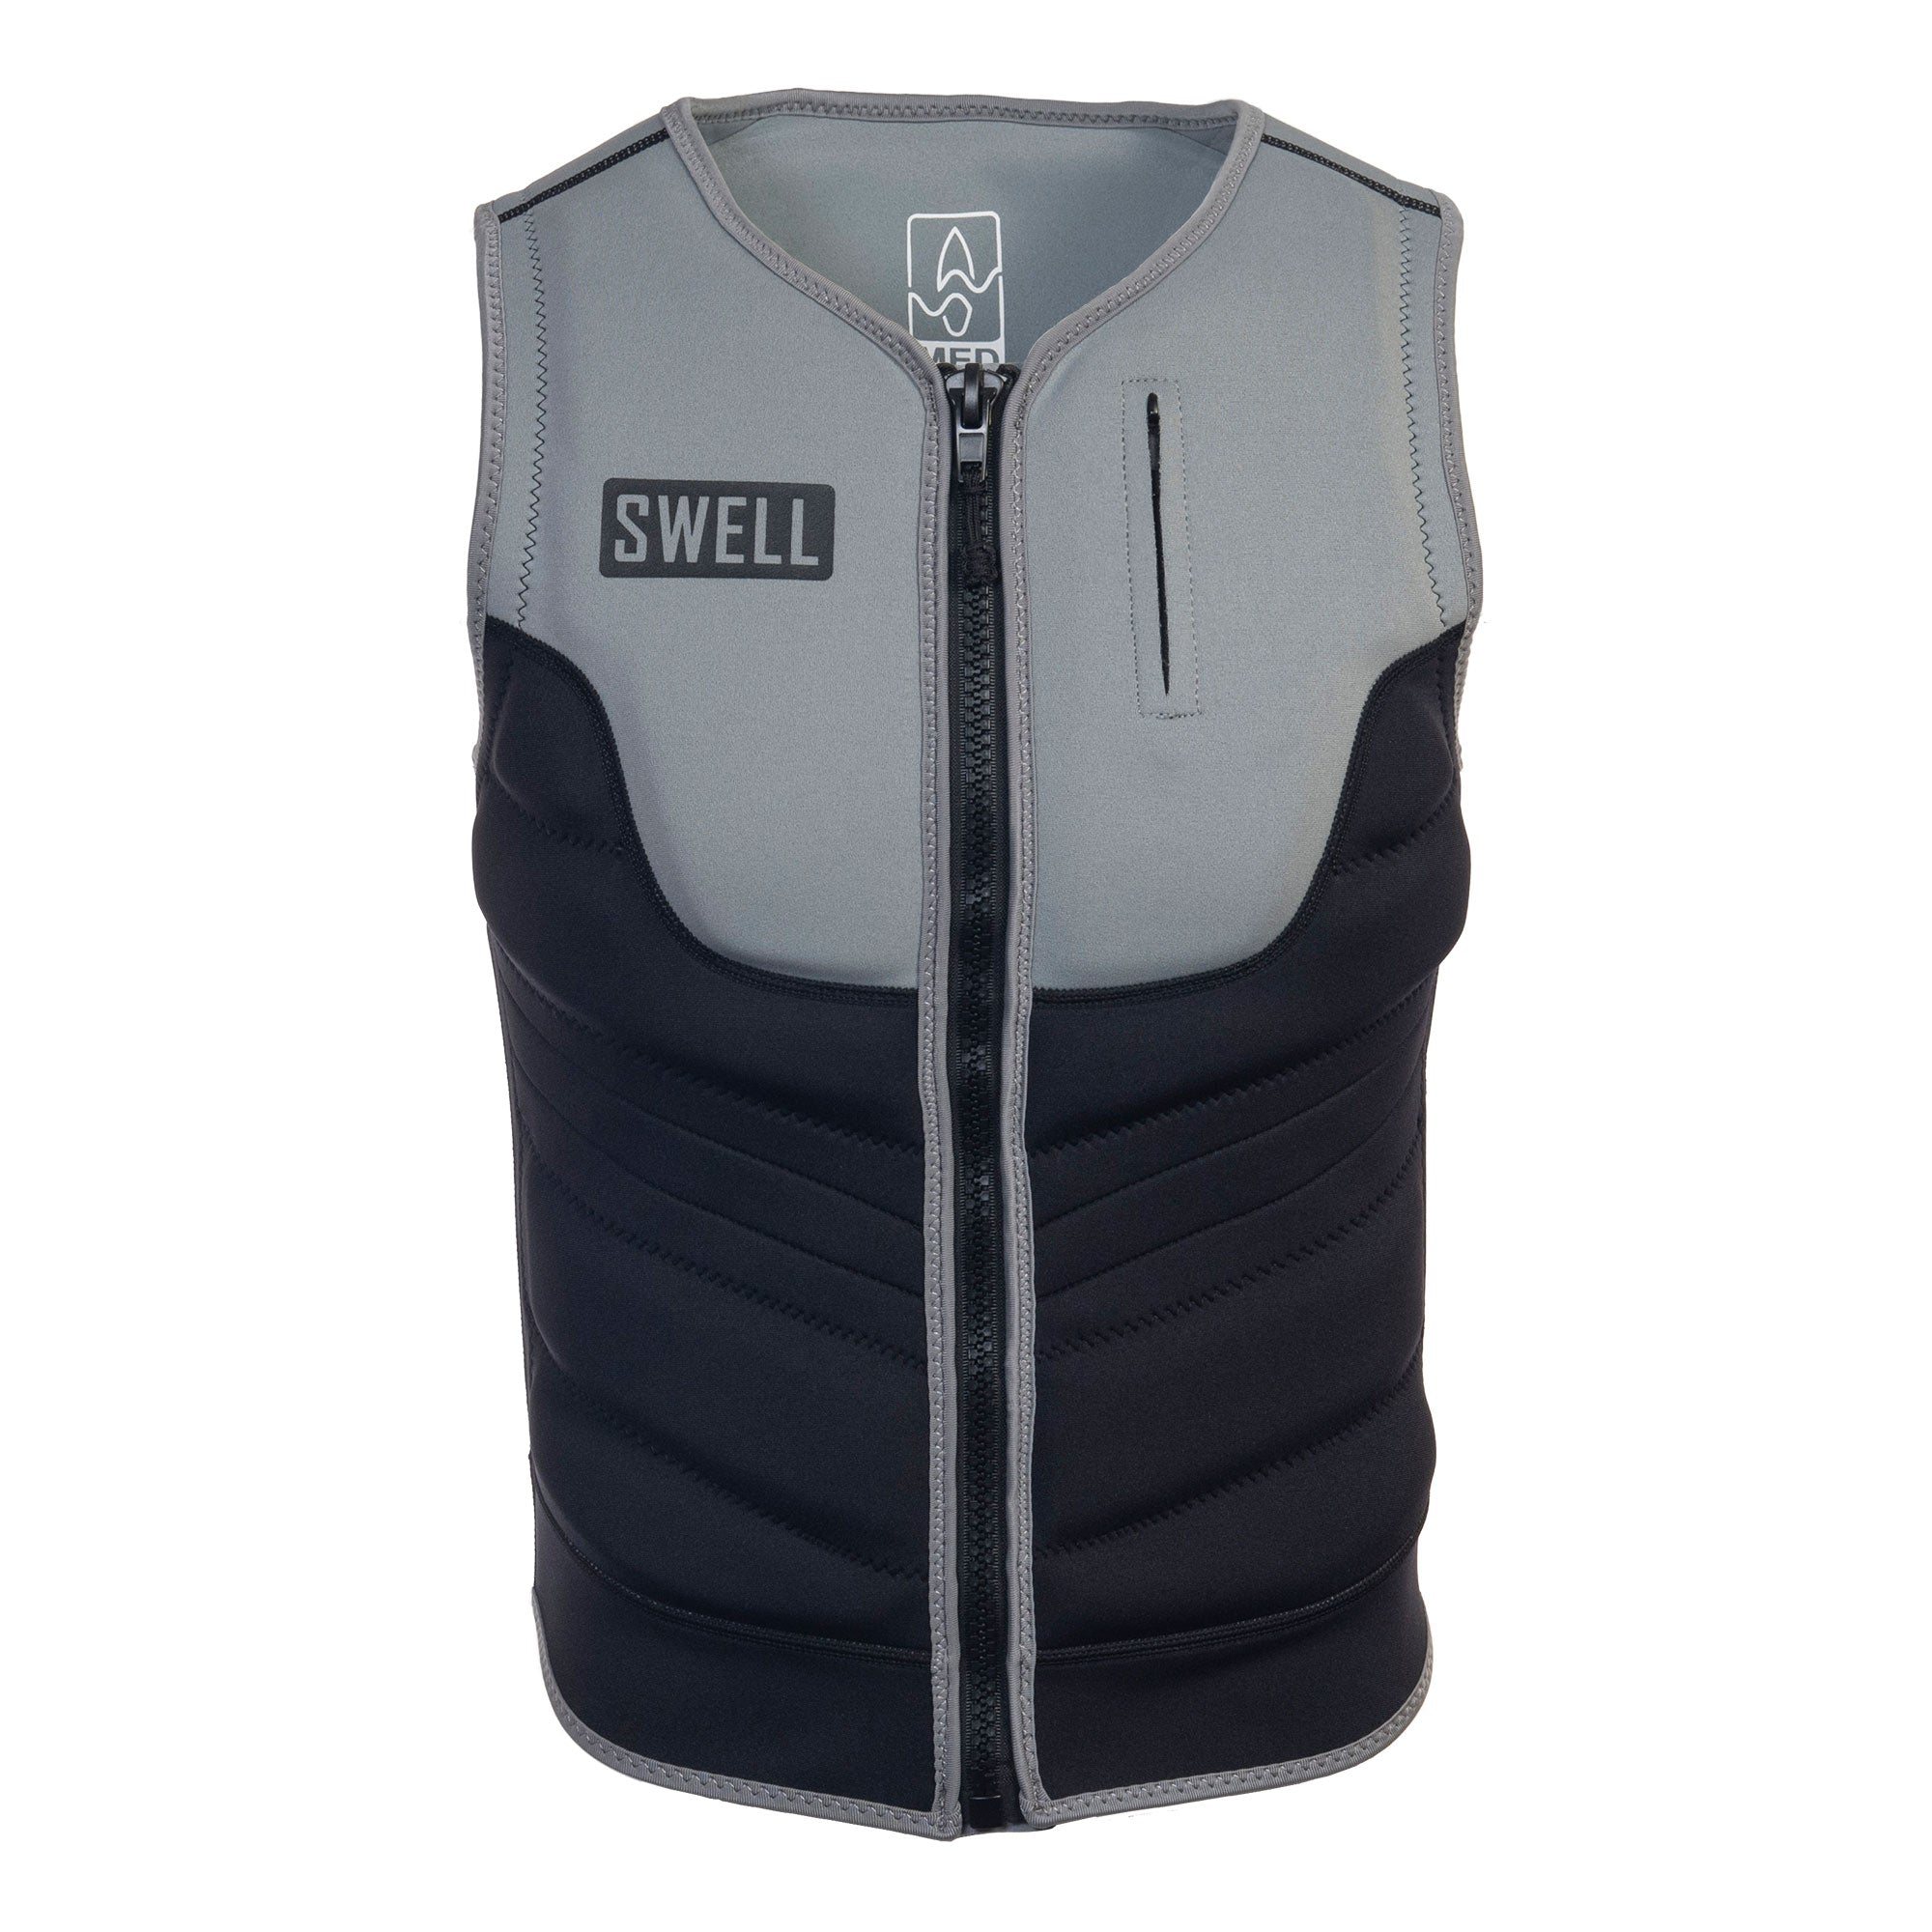 SWELL Comp Vest - Men's Carbon -  Neoprene Jacket *LIMITED RELEASE COLOR* - SWELL Wakesurf